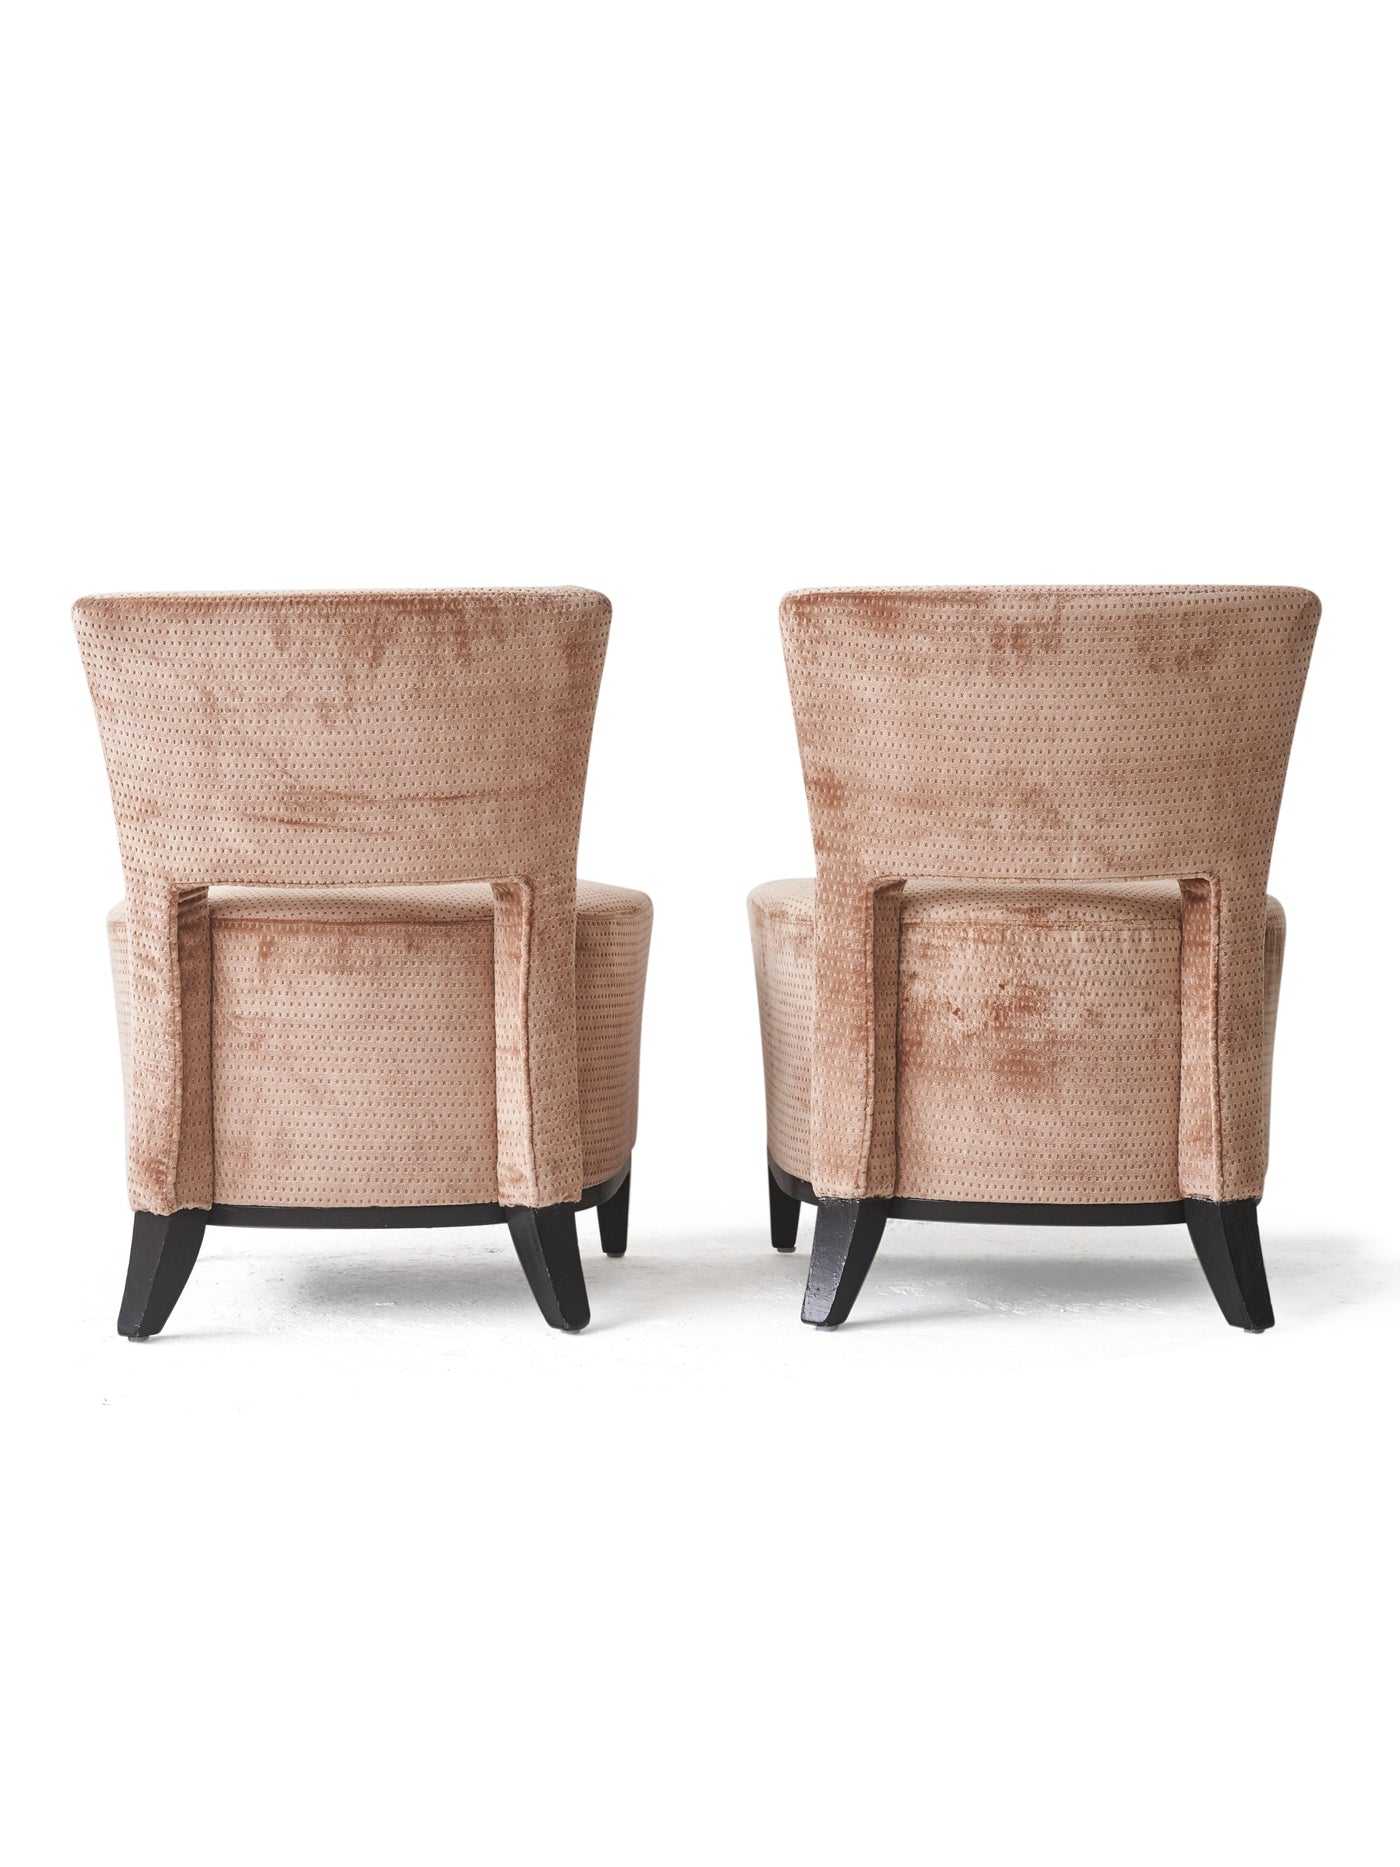 Pair of Low Chairs in Blush Velvet from The Upper House